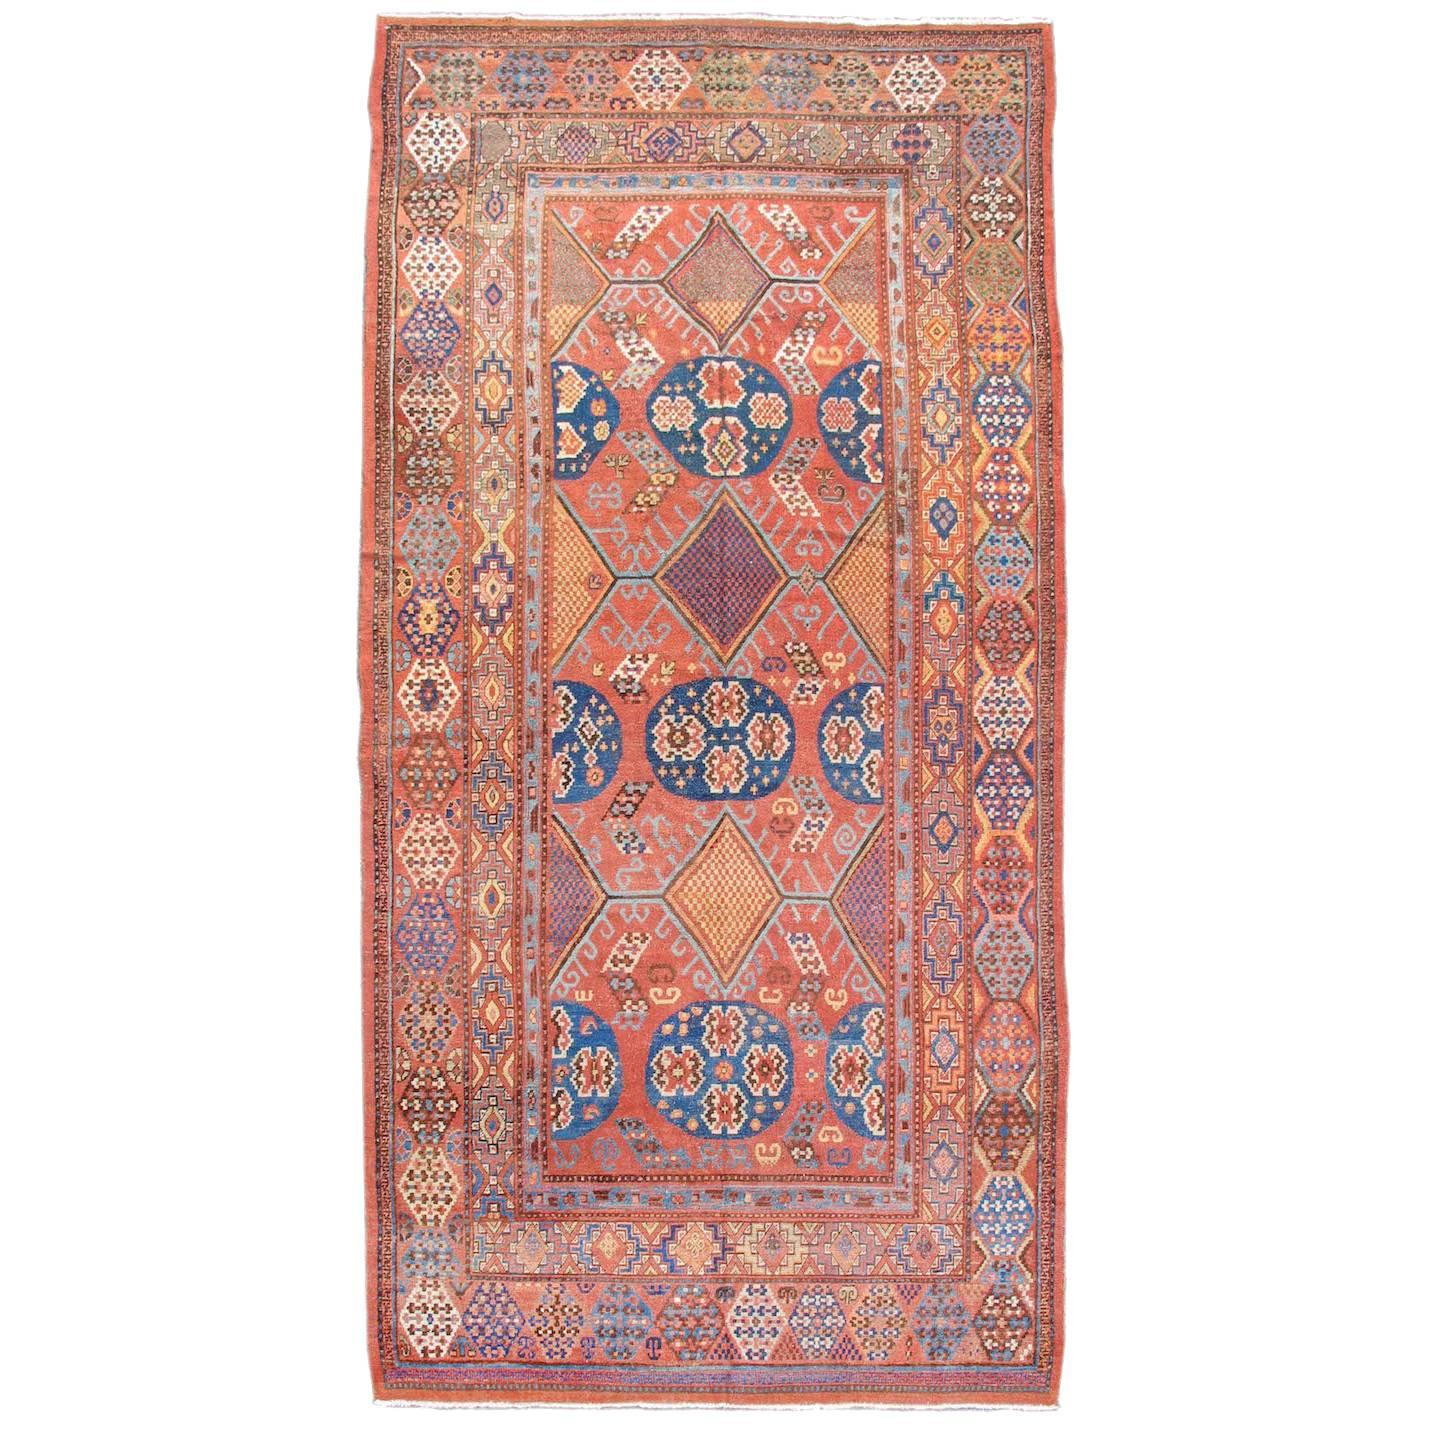 Early 19th Century Red and Blue Khotan Carpet